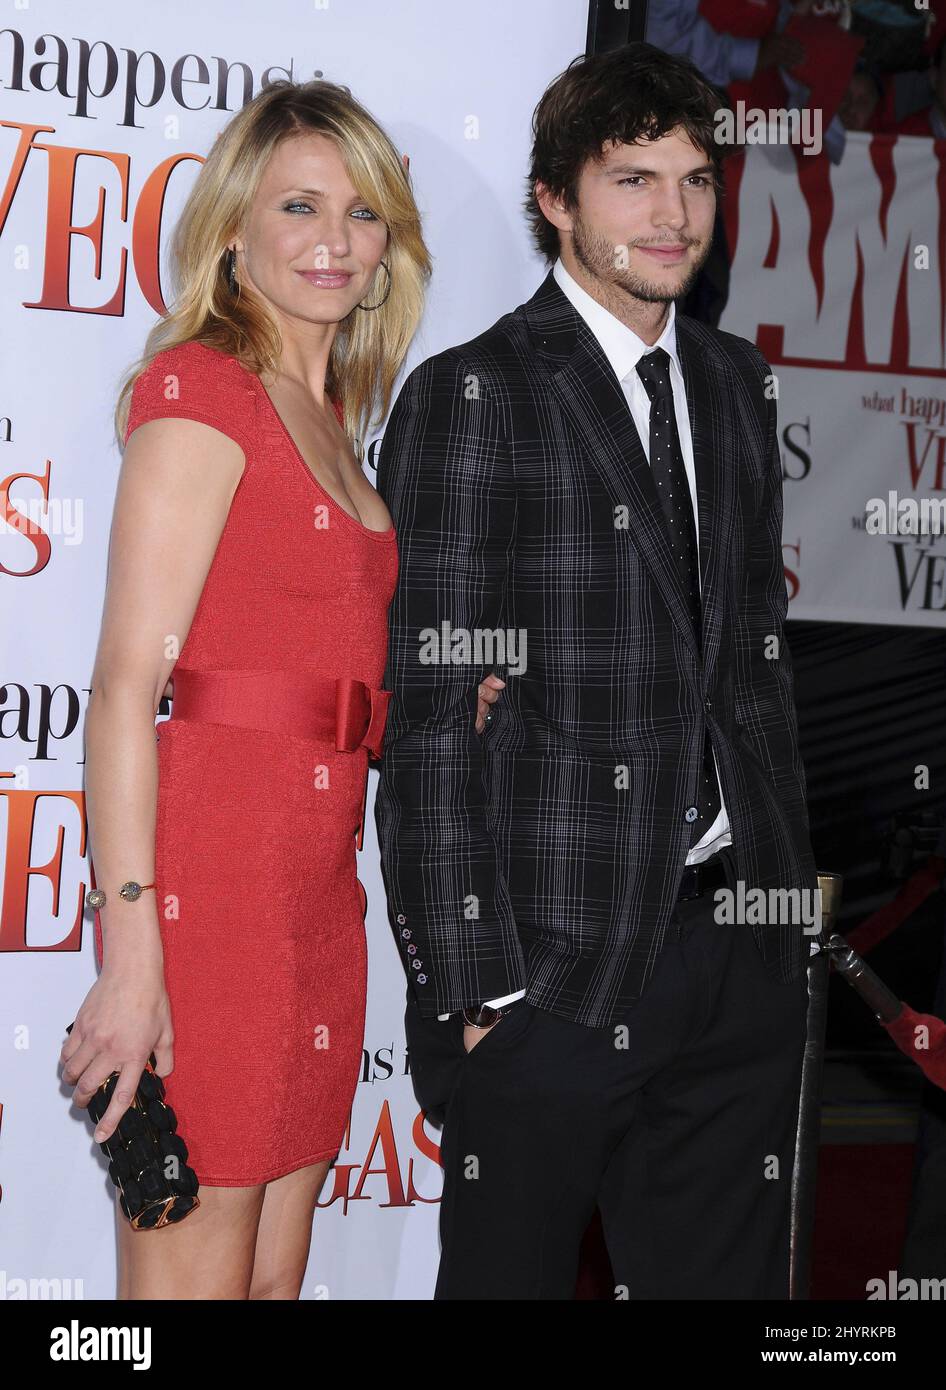 Cameron Diaz and Ashton Kutcher arrive at the world premiere of 'What Happens in Vegas', Los Angeles. Stock Photo